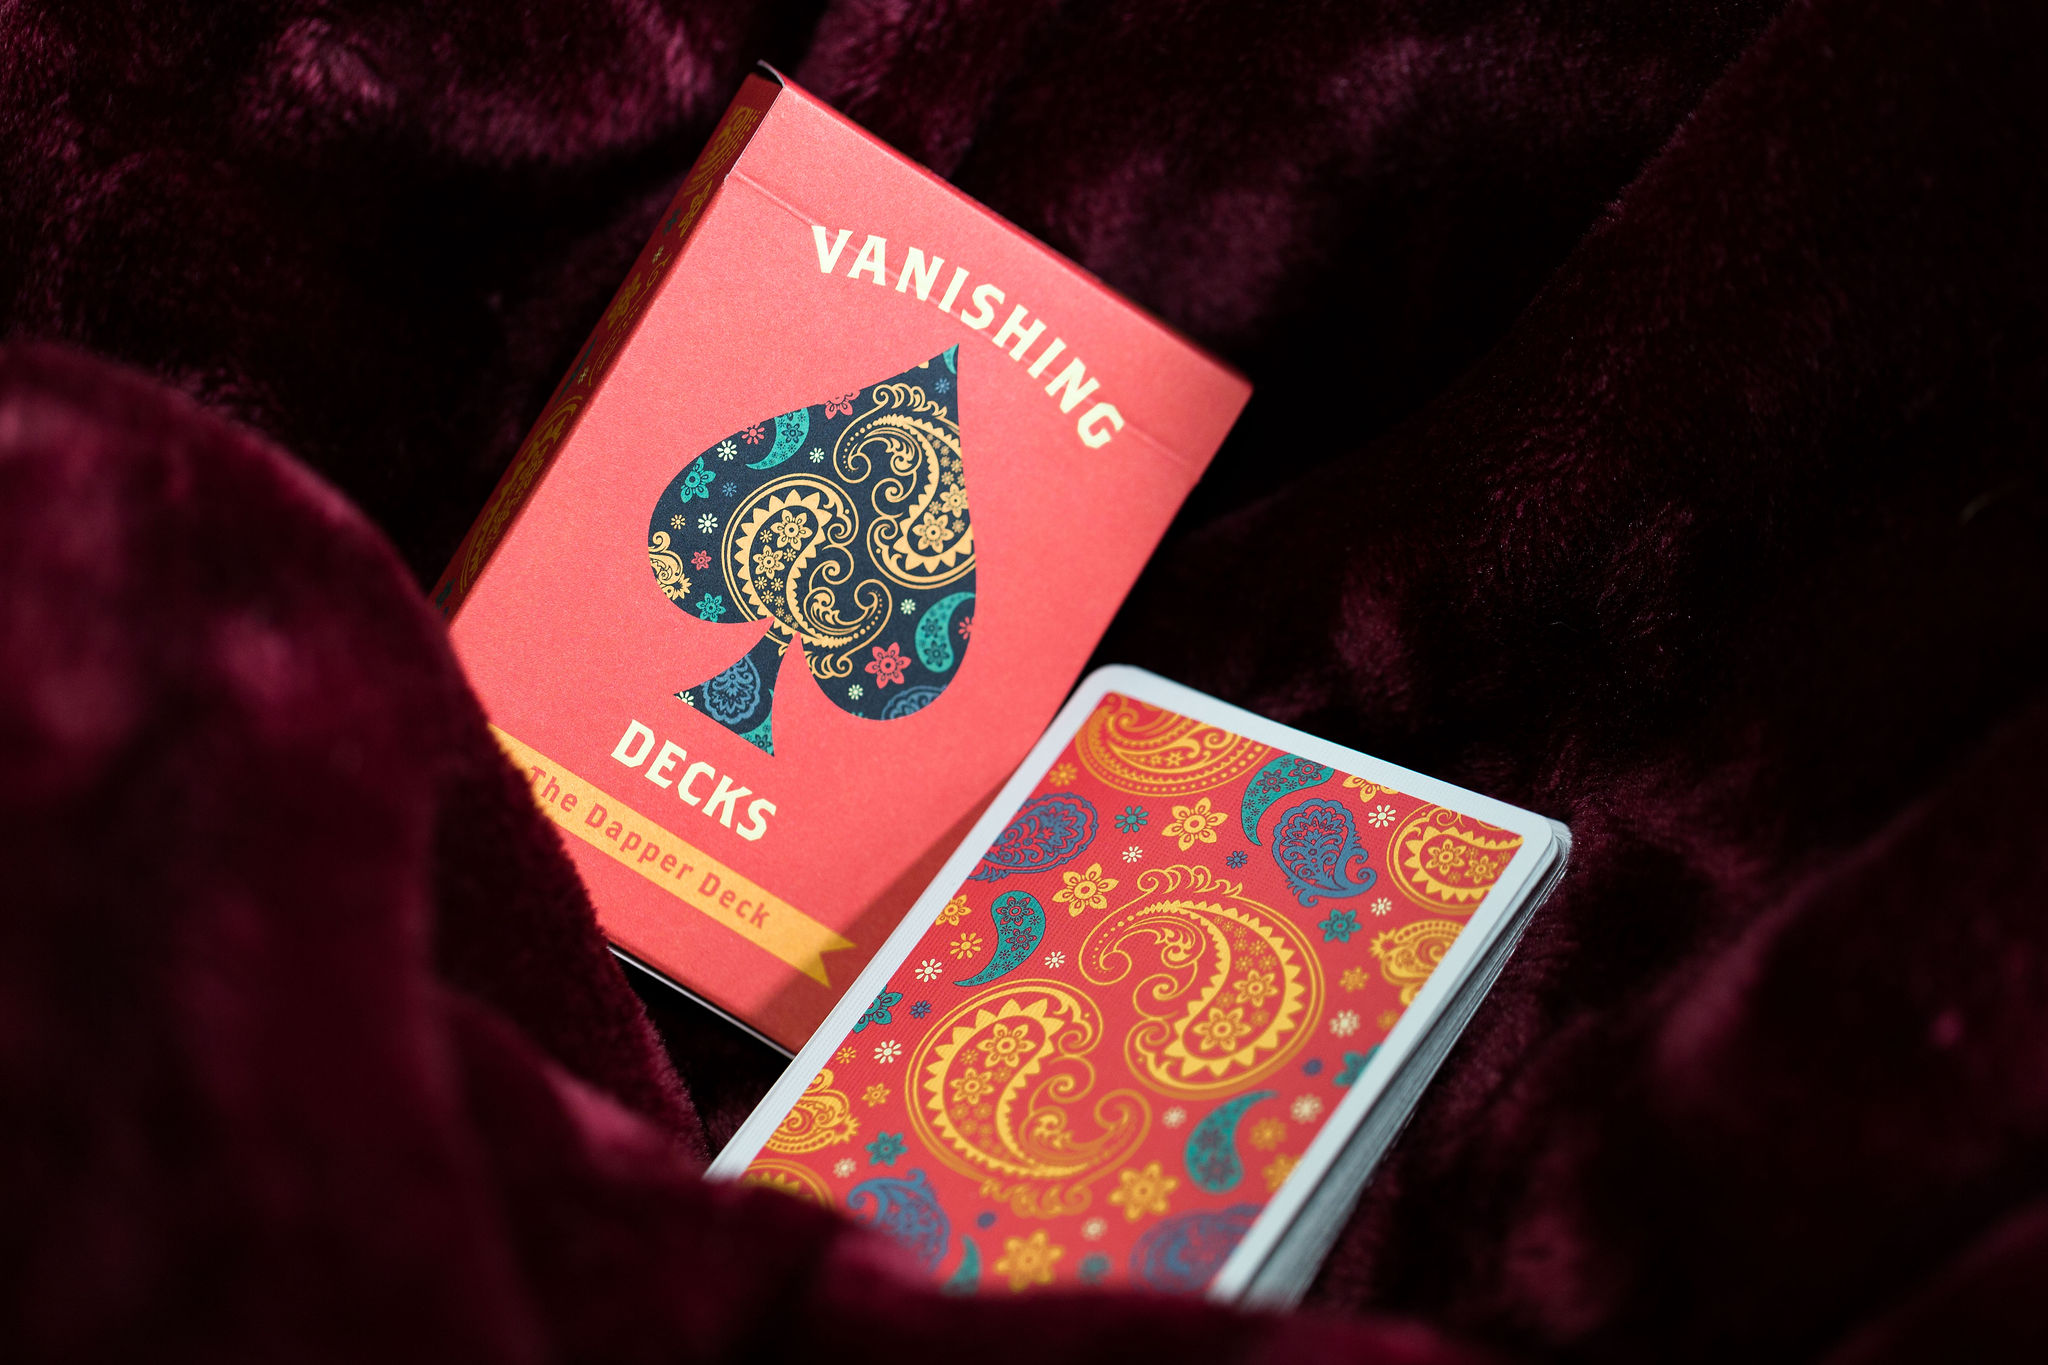 Details about   THE DAPPER DECK OF PLAYING CARDS BY VANISHING INC POKER SIZE MAGIC TRICKS GAMES 